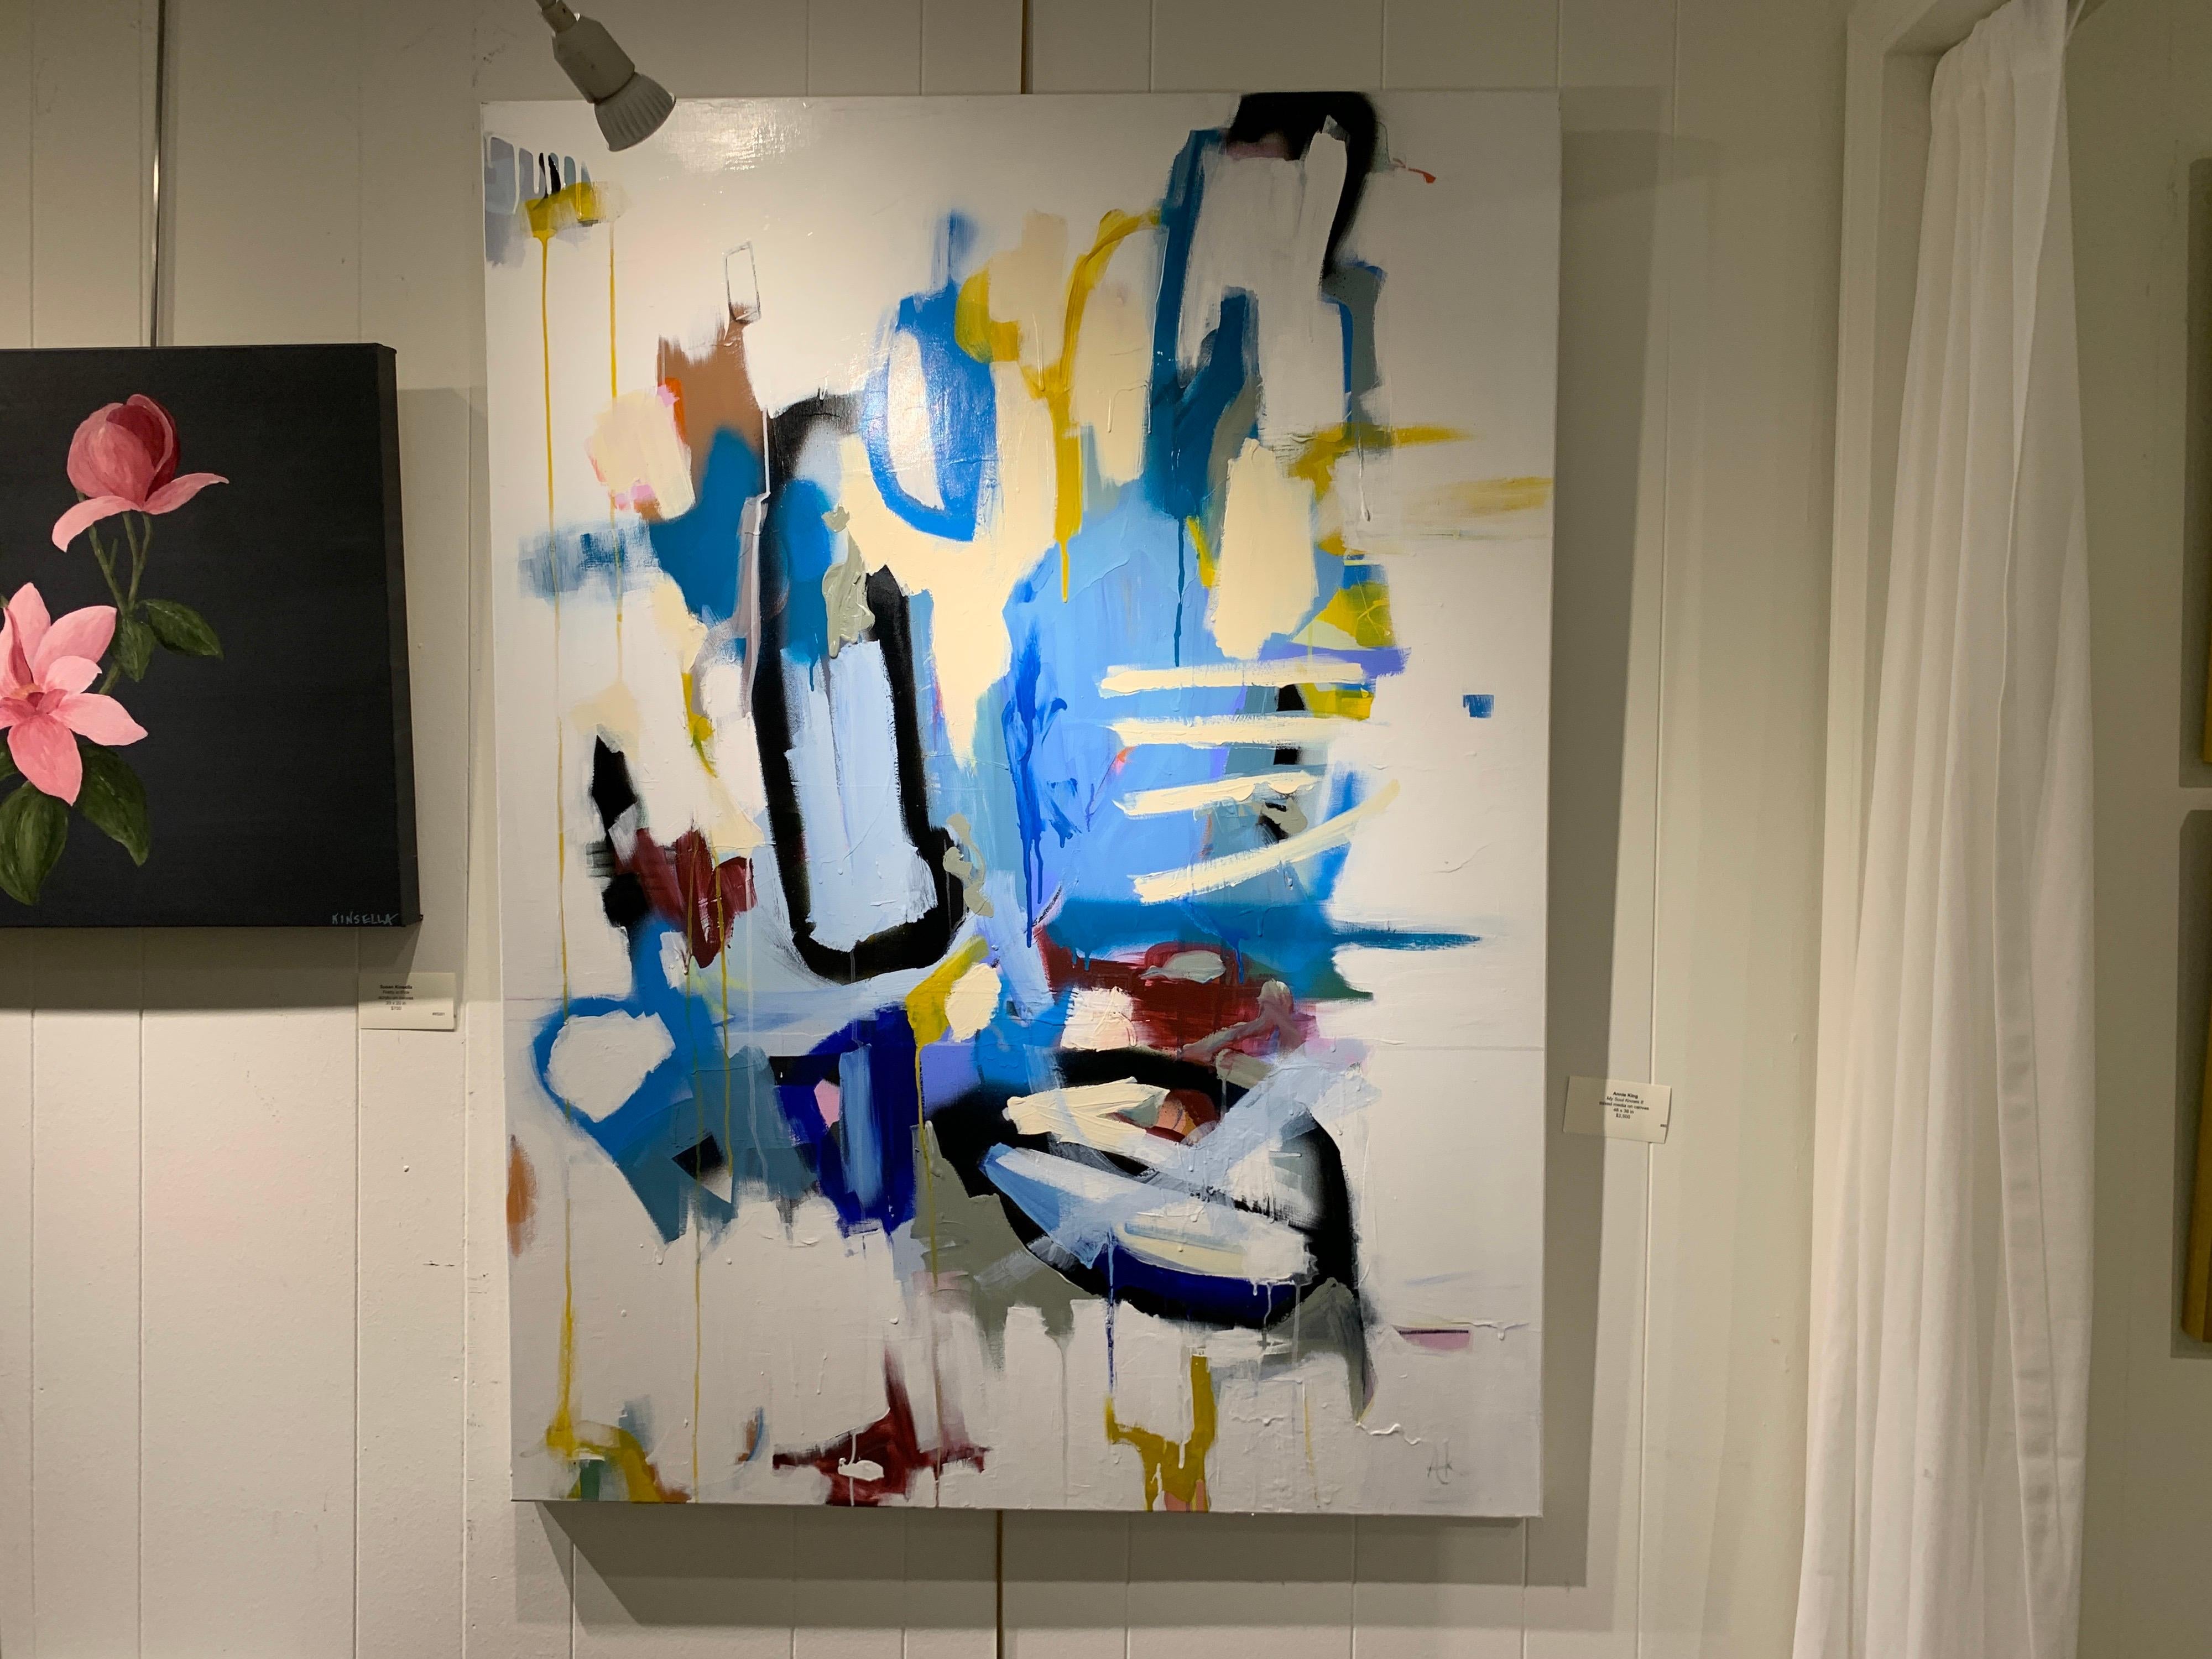 'My Soul Knows It' is a large mixed media on canvas abstract painting of vertical format created by American artist Annie King in 2020. Featuring a palette made of  beige, blue, white, black and soft yellow among other tones, this painting showcases